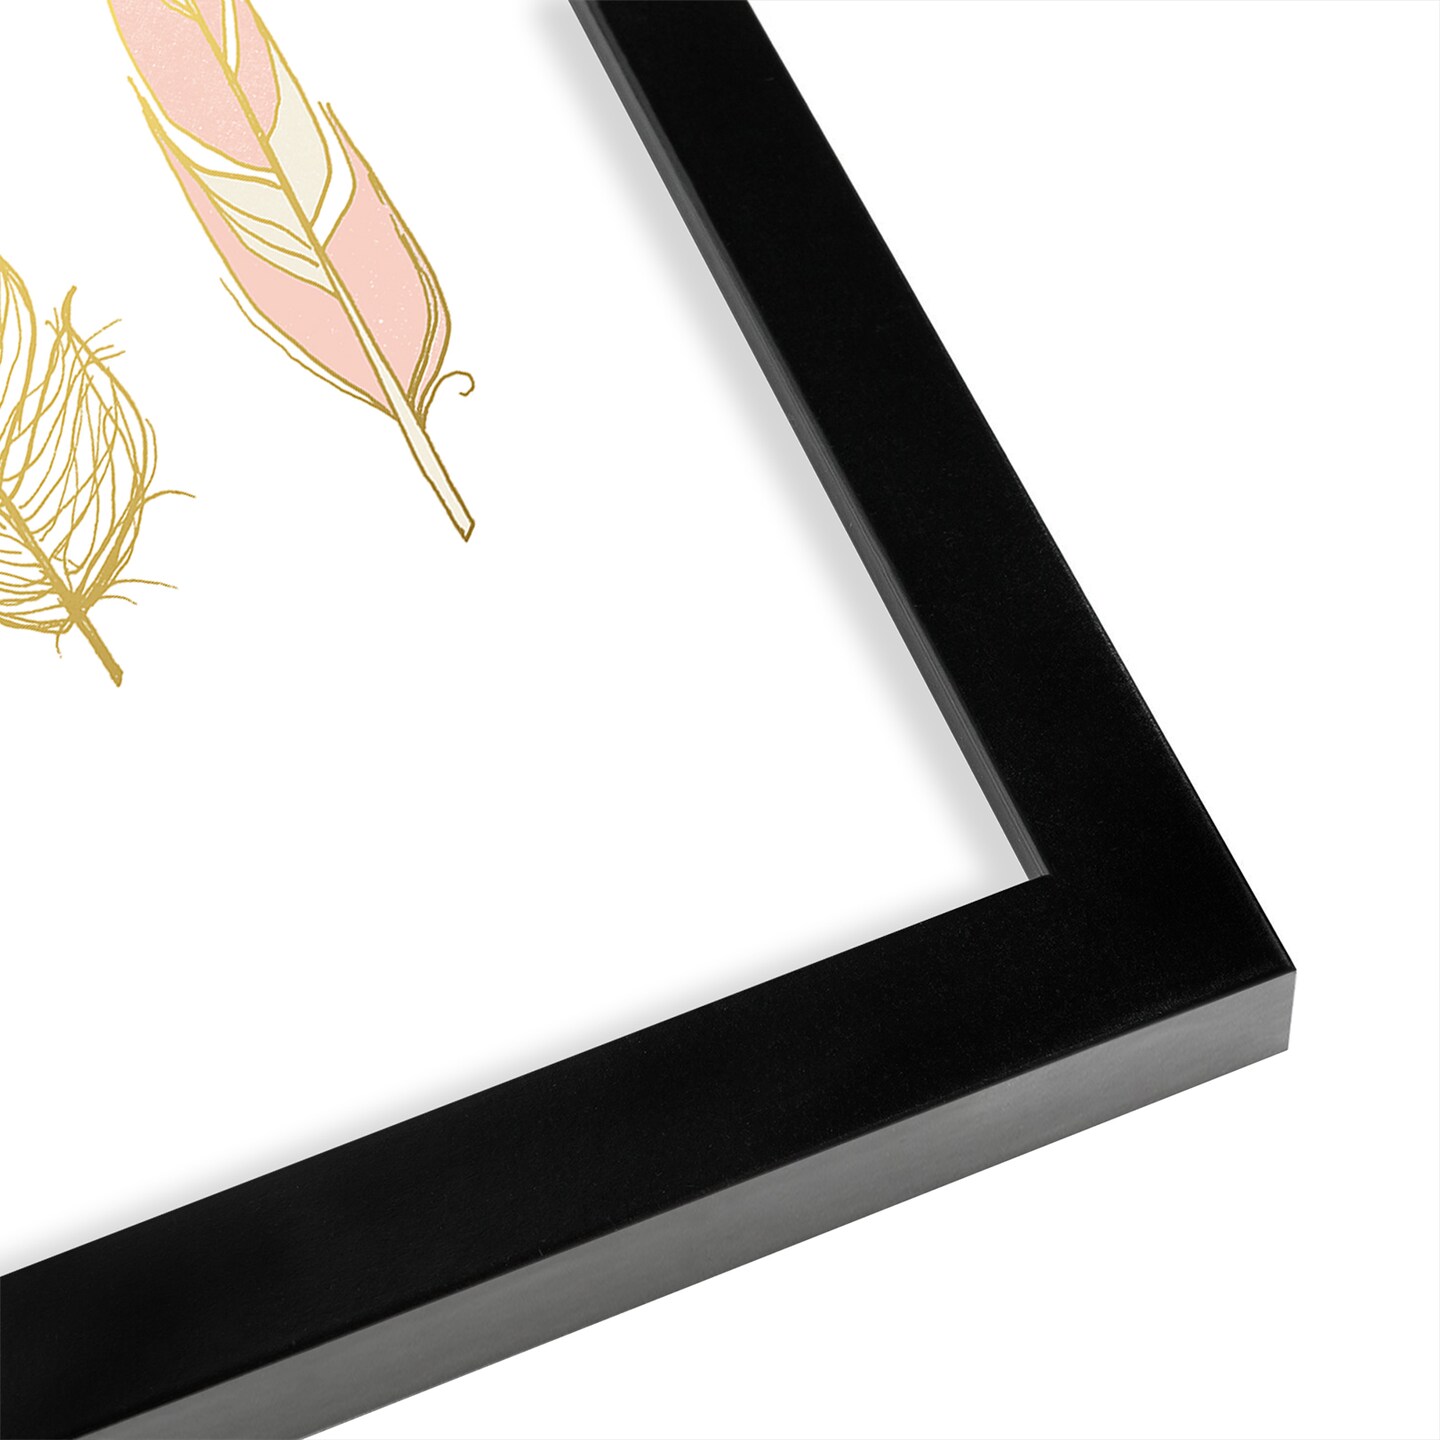 Three Feathers In Gold by Wall + Wonder Frame  - Americanflat